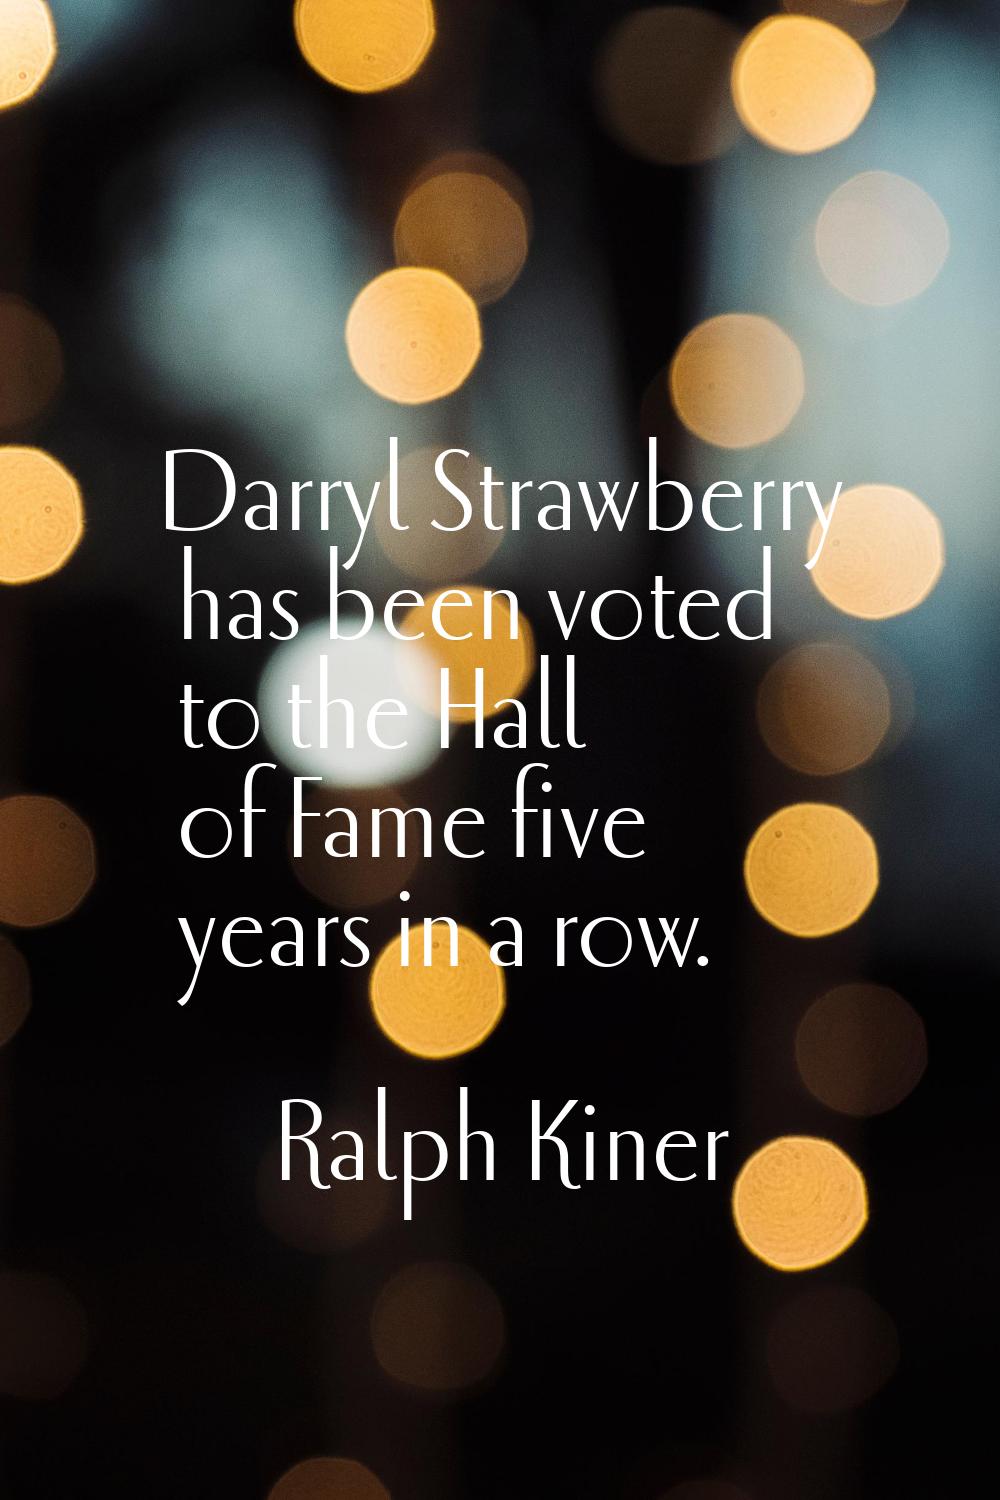 Darryl Strawberry has been voted to the Hall of Fame five years in a row.